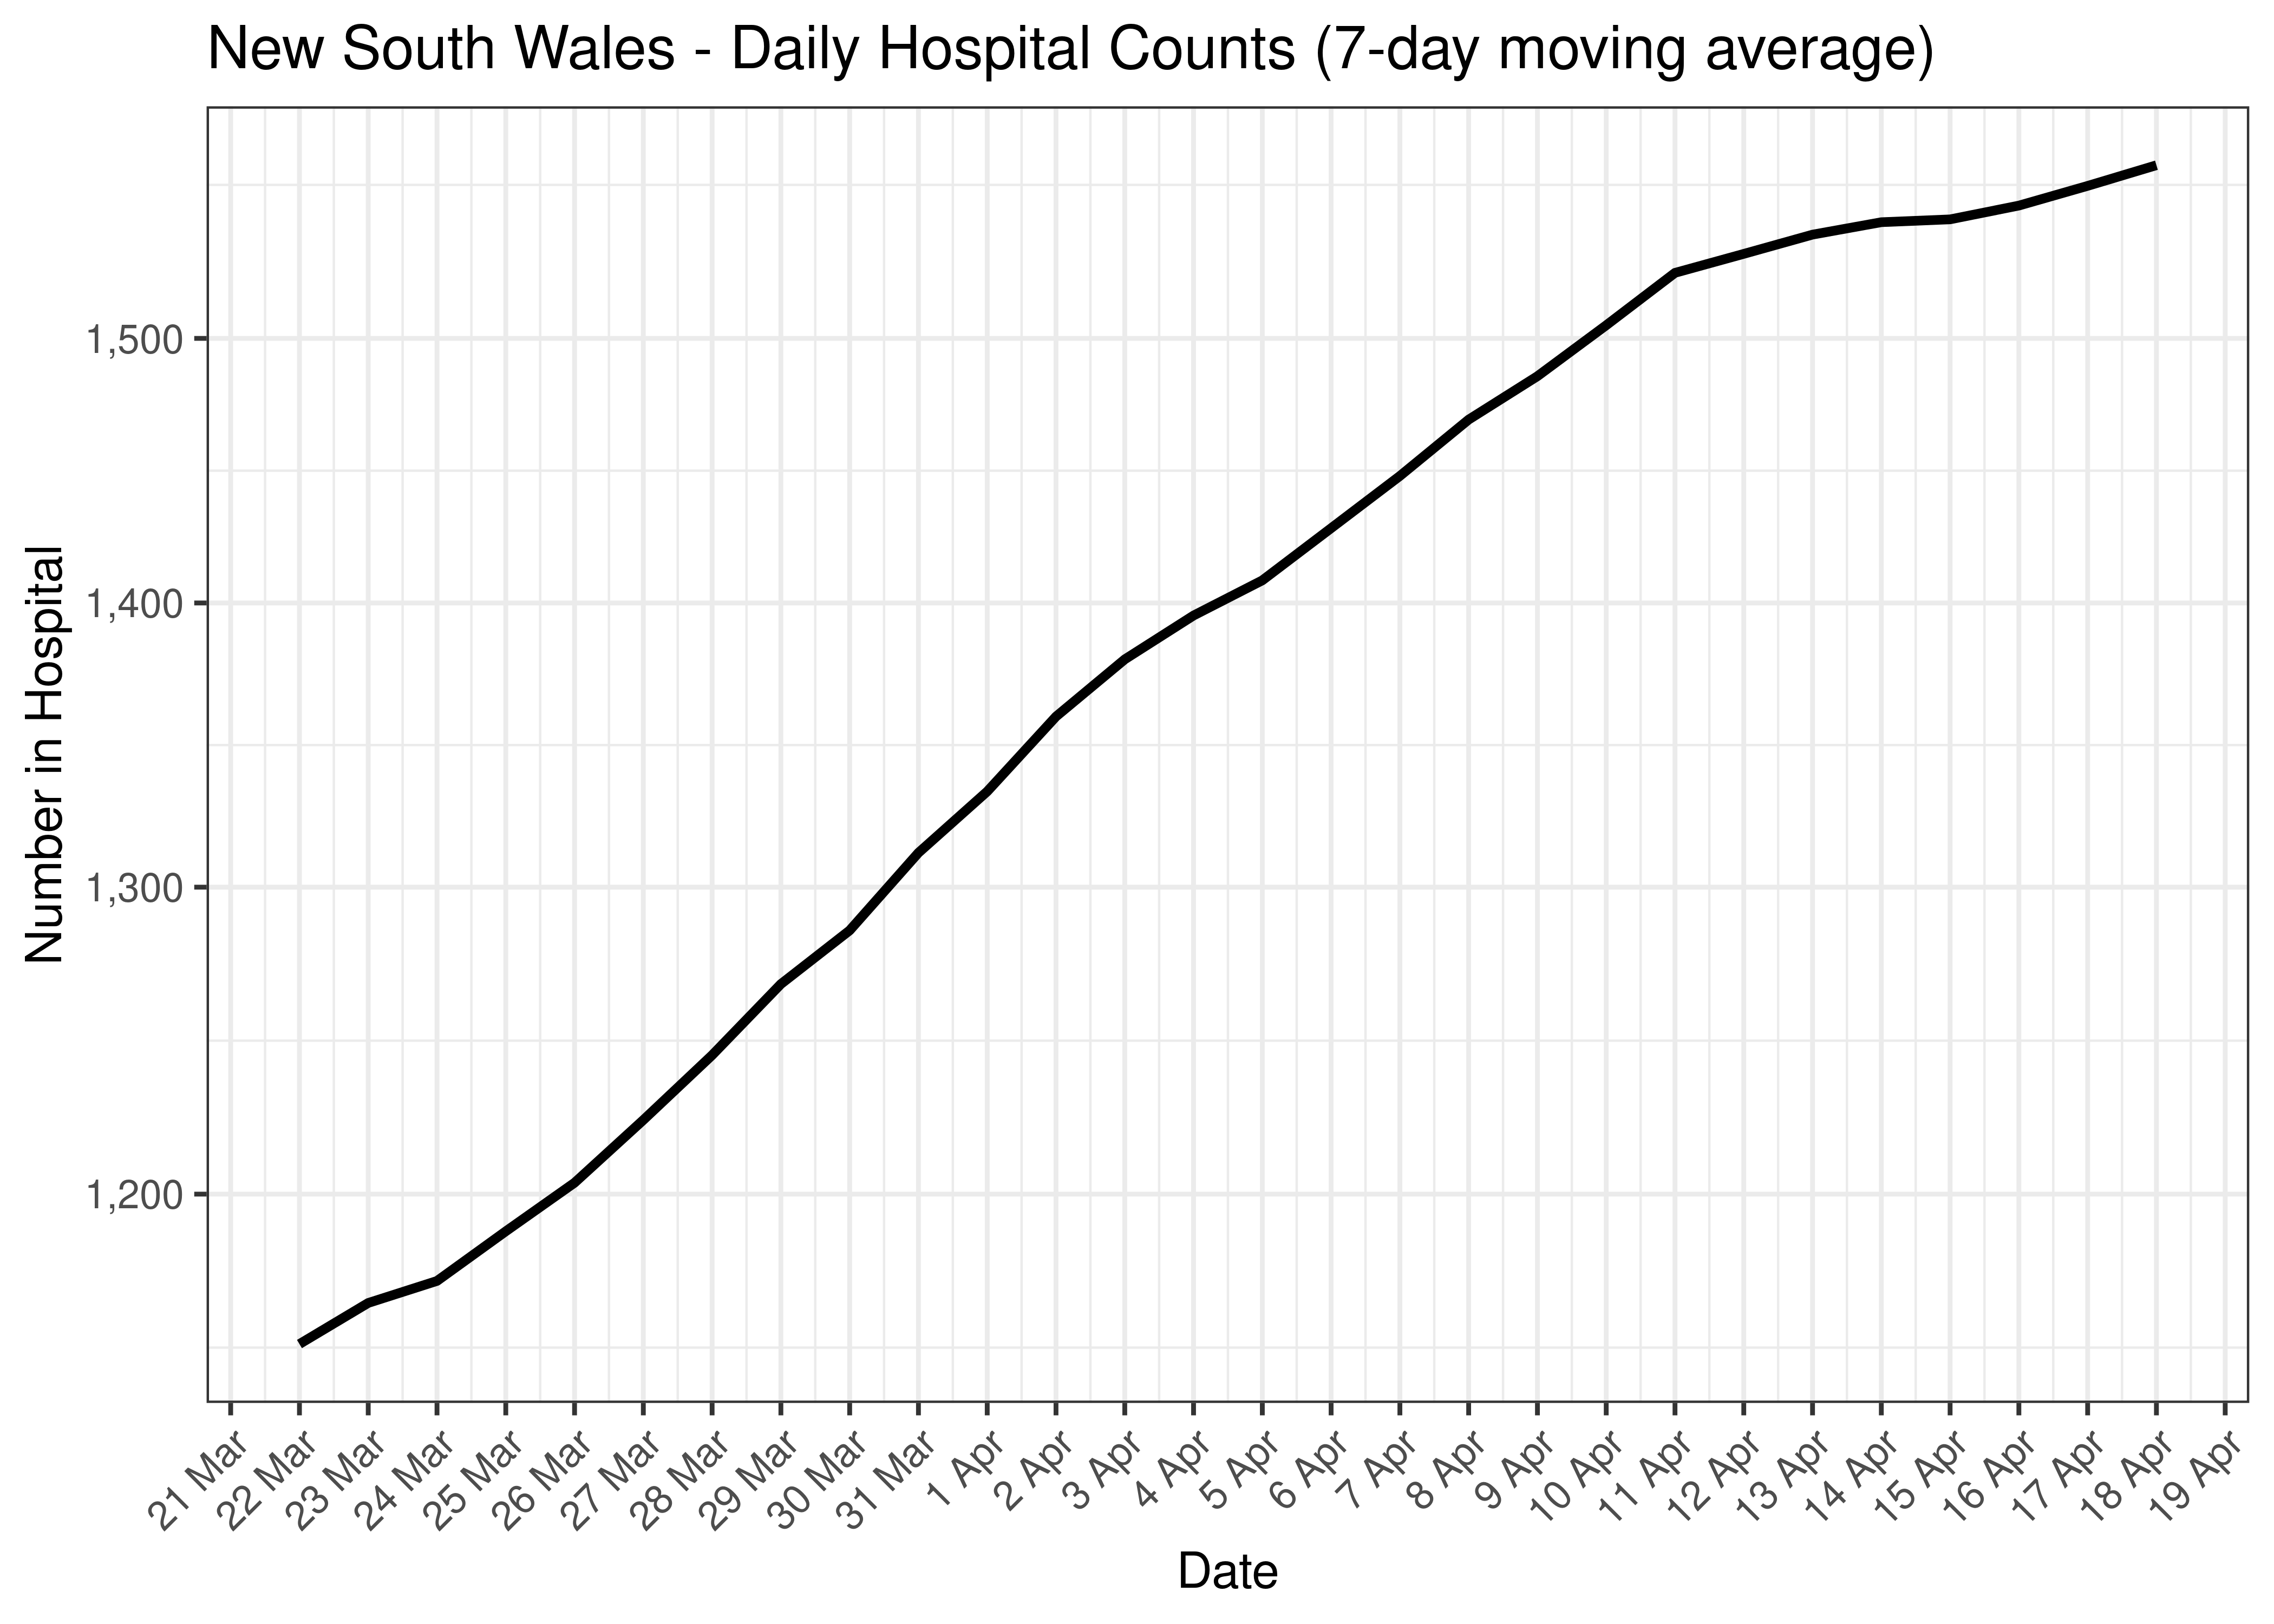 New South Wales - Daily Hospital Counts for Last 30-days (7-day moving average)